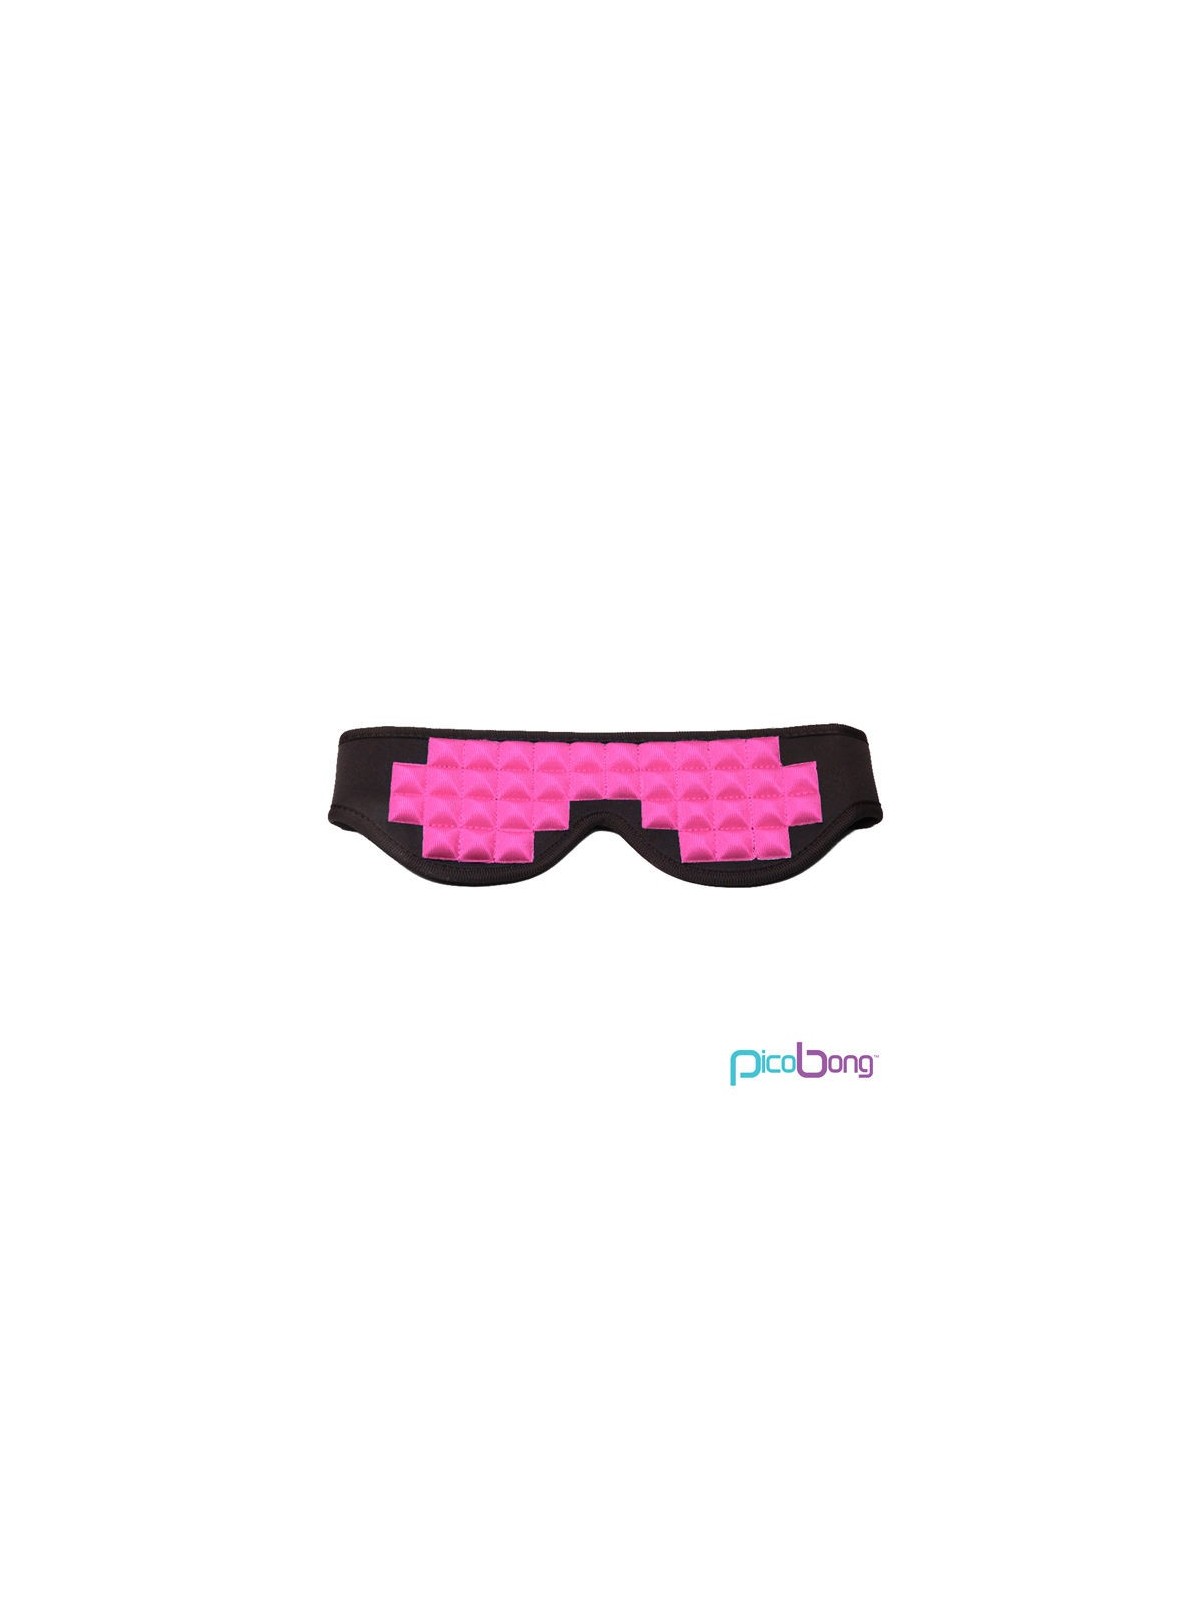 Picobong See No Evil Blindfold Cerise - Comprar Antifaz sexy Picobong - Antifaces sexys (1)